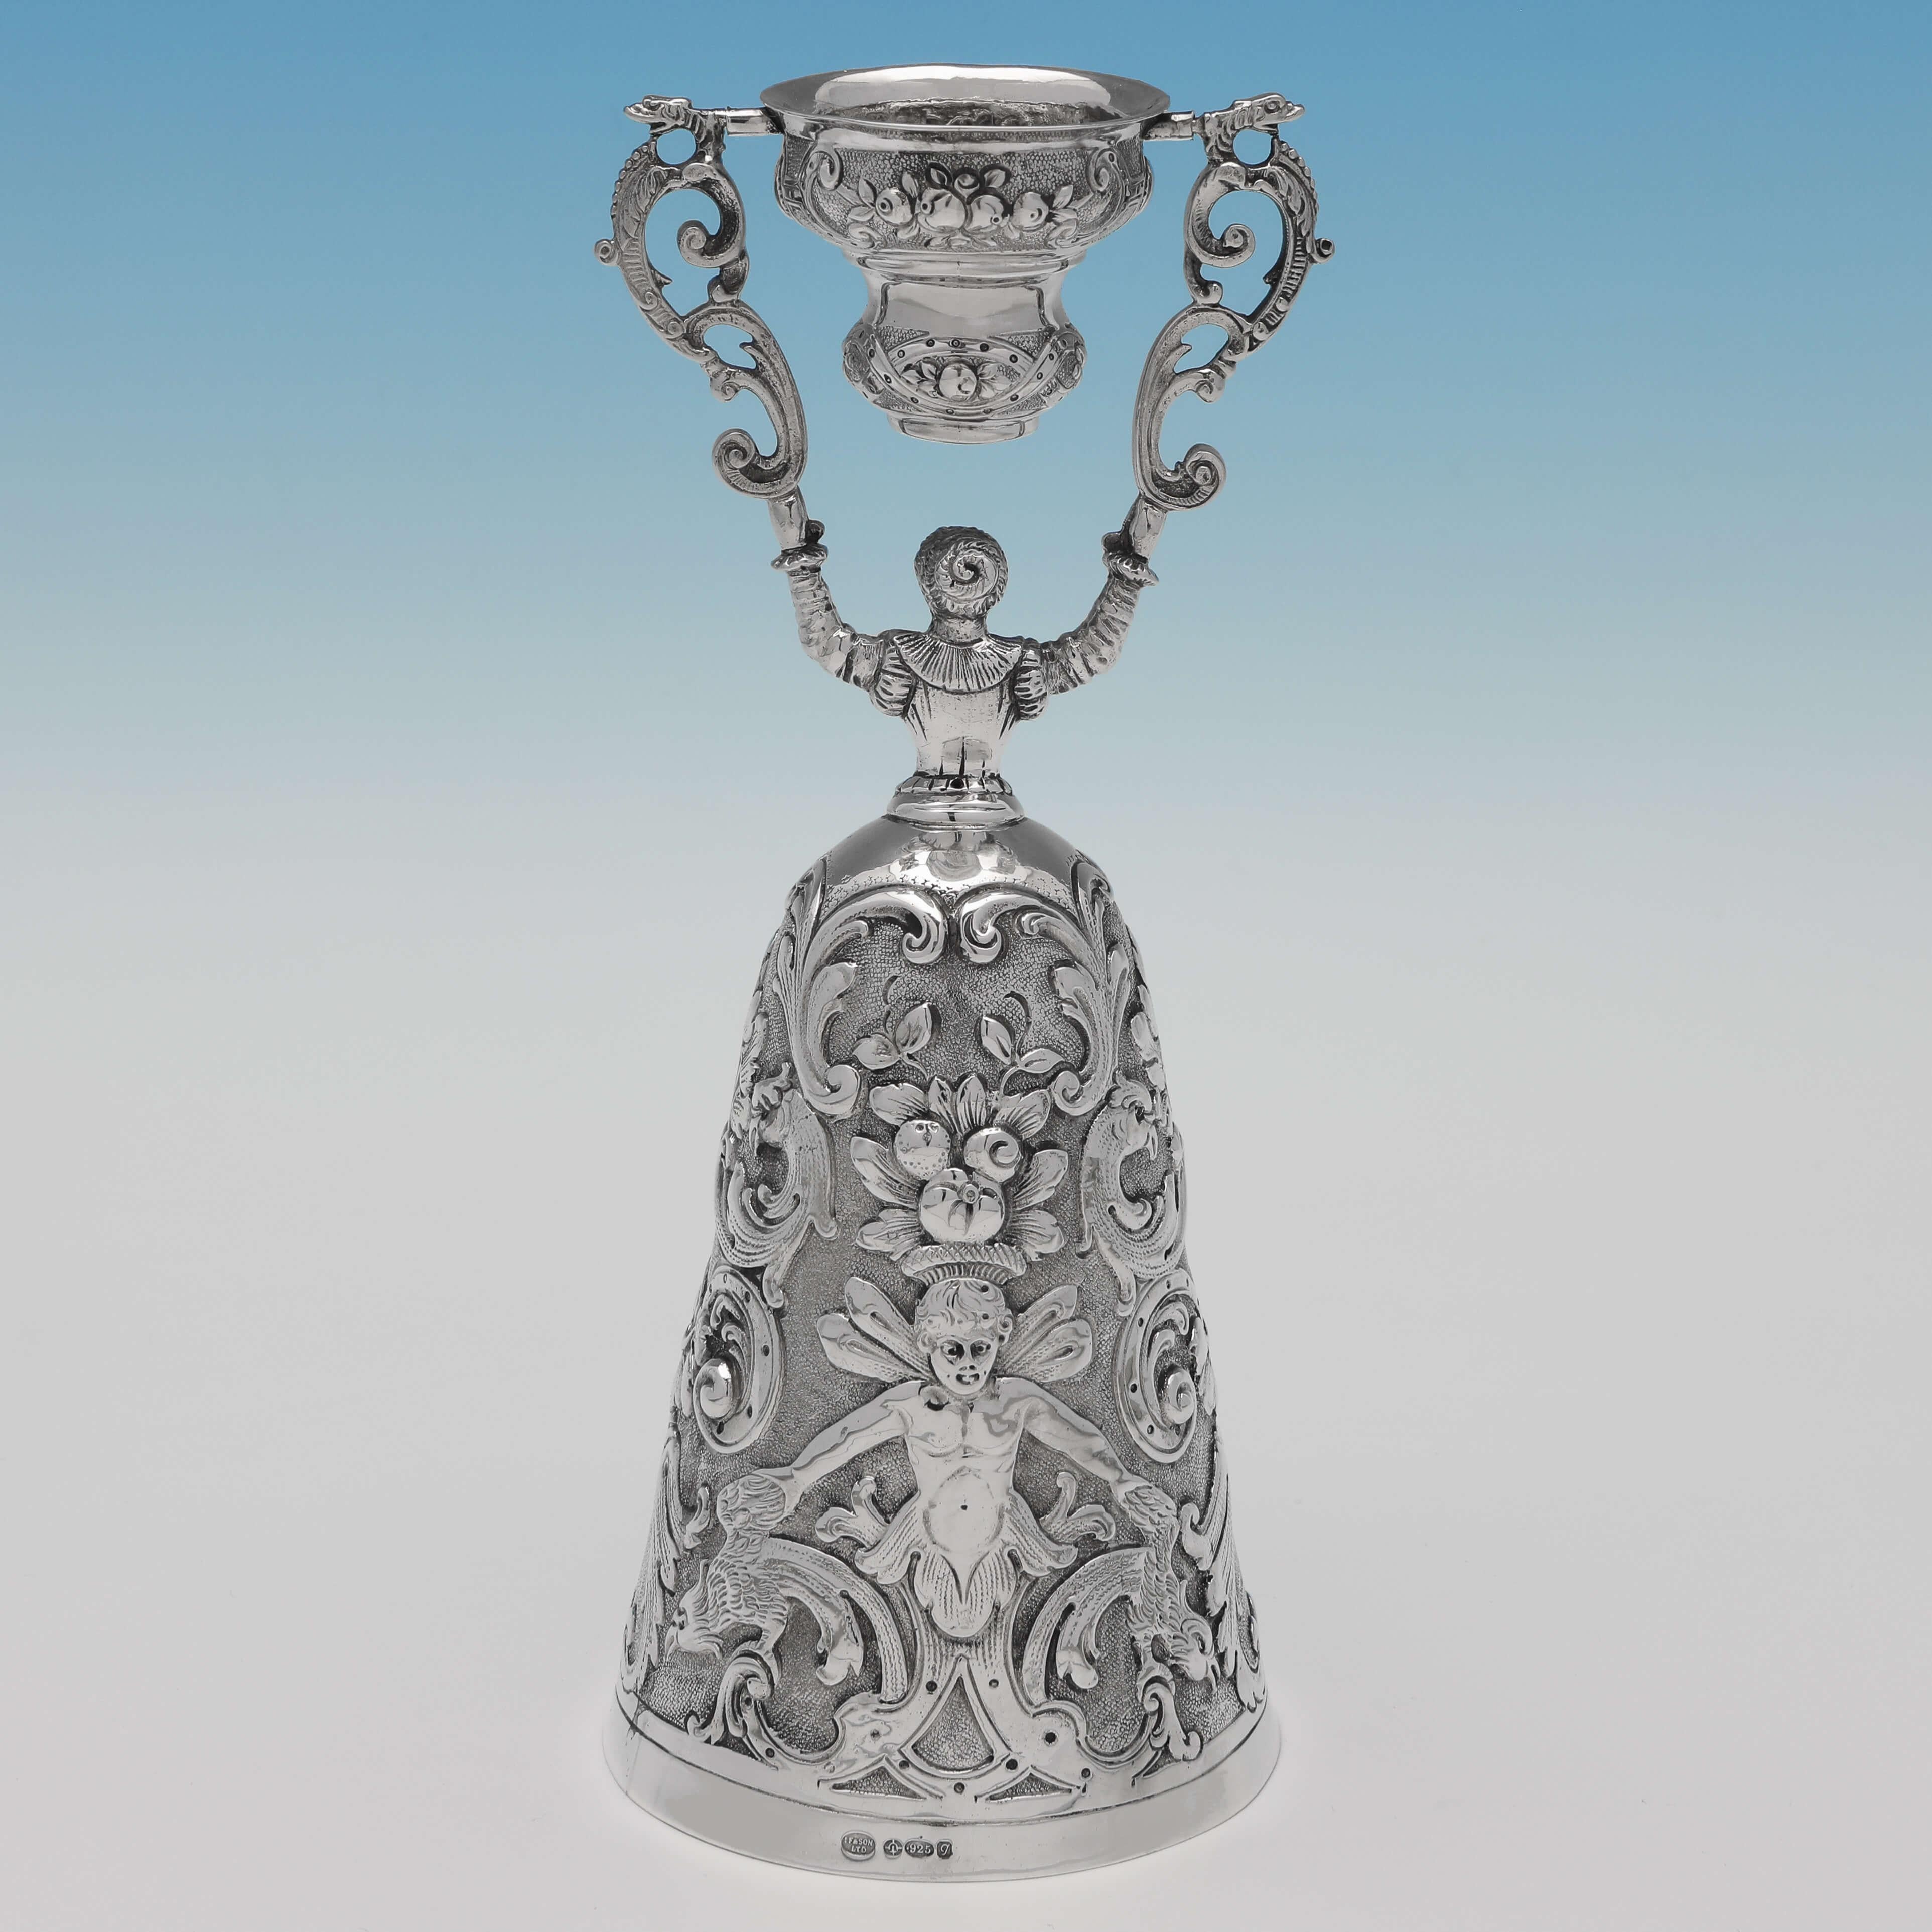 Carrying import marks for London in 1962 by I. Freeman & Sons, this striking, Sterling Silver Wager Cup, is modelled as a lady in costume, and features chased decoration throughout. The wager cup measures 8